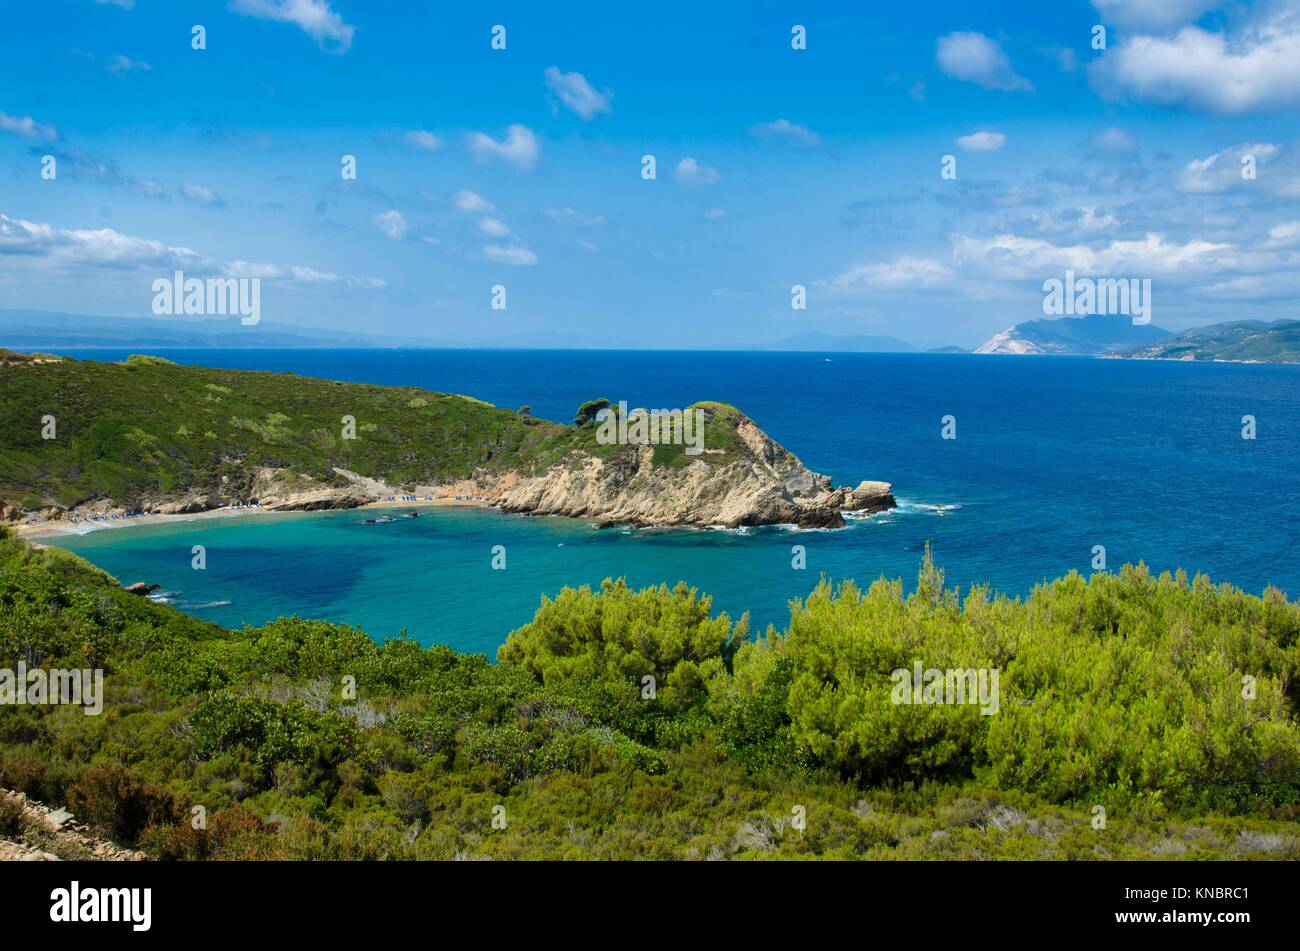 View from the top of the beach of Krifi Amos on the island of Skiathos Greece, the sea is green and turquoise surrounded by rich vegetation. Stock Photo